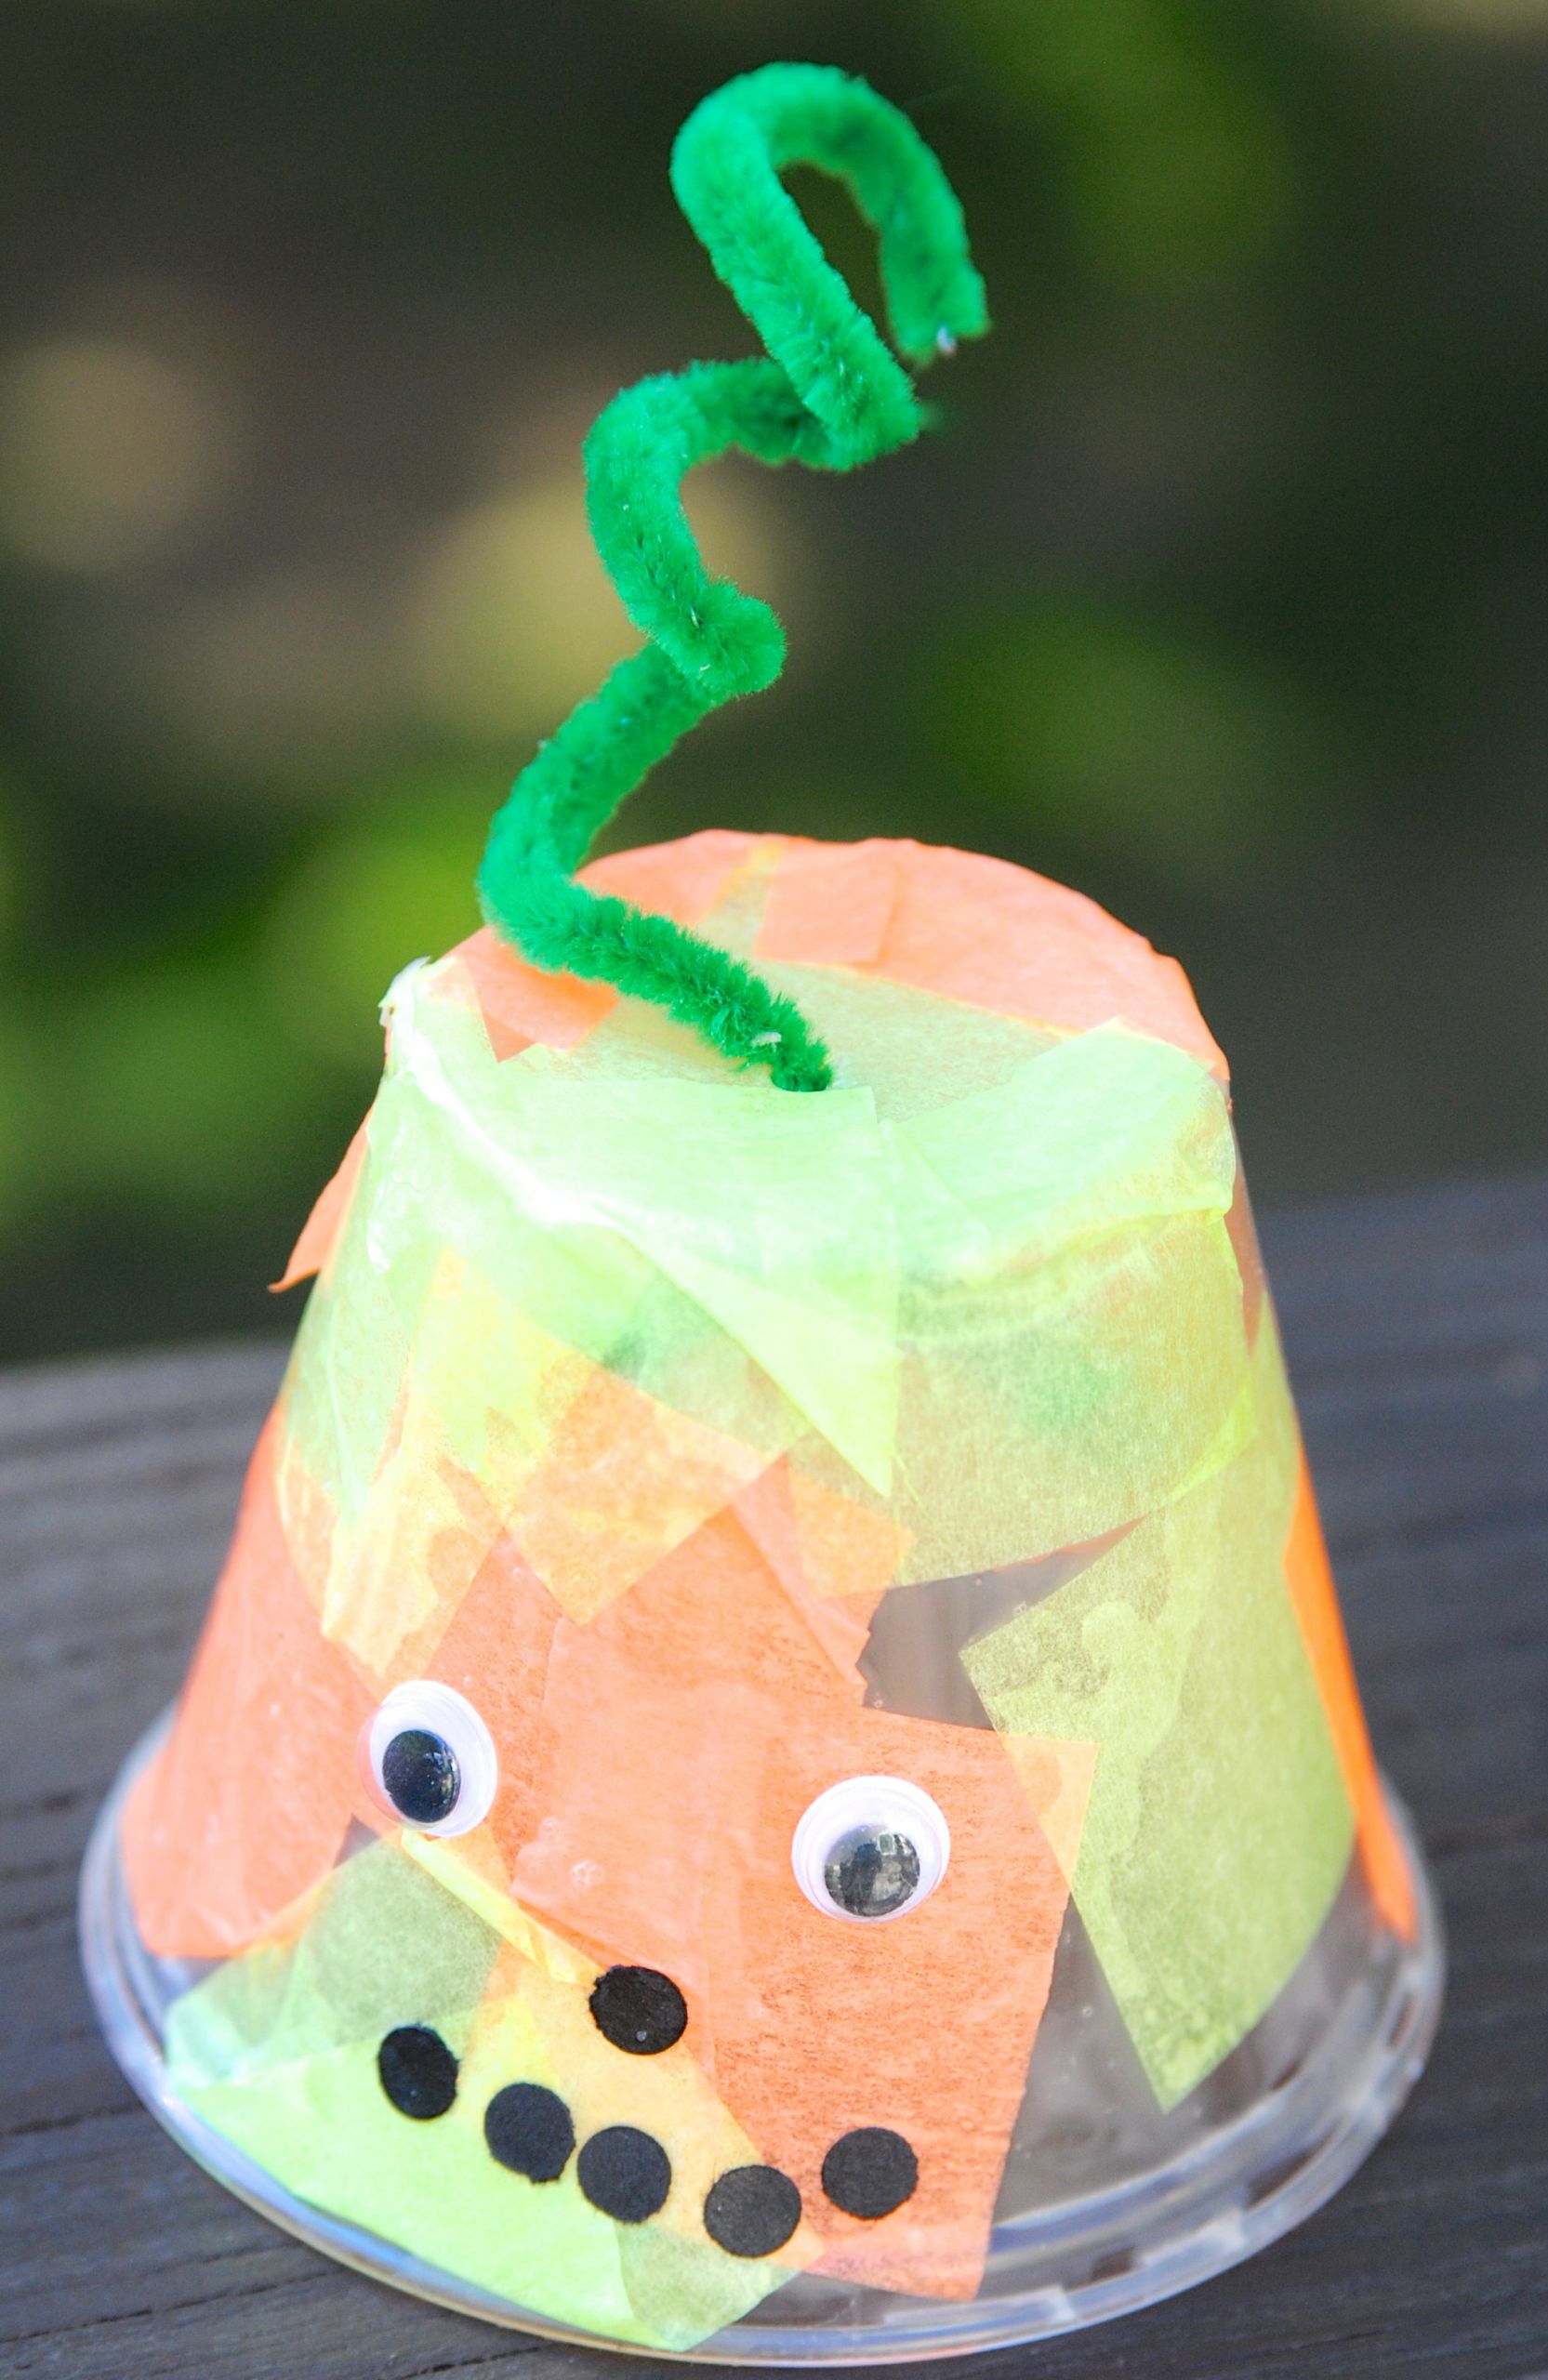 Craft Ideas For Toddlers
 Quick Halloween Craft Ideas for Kids